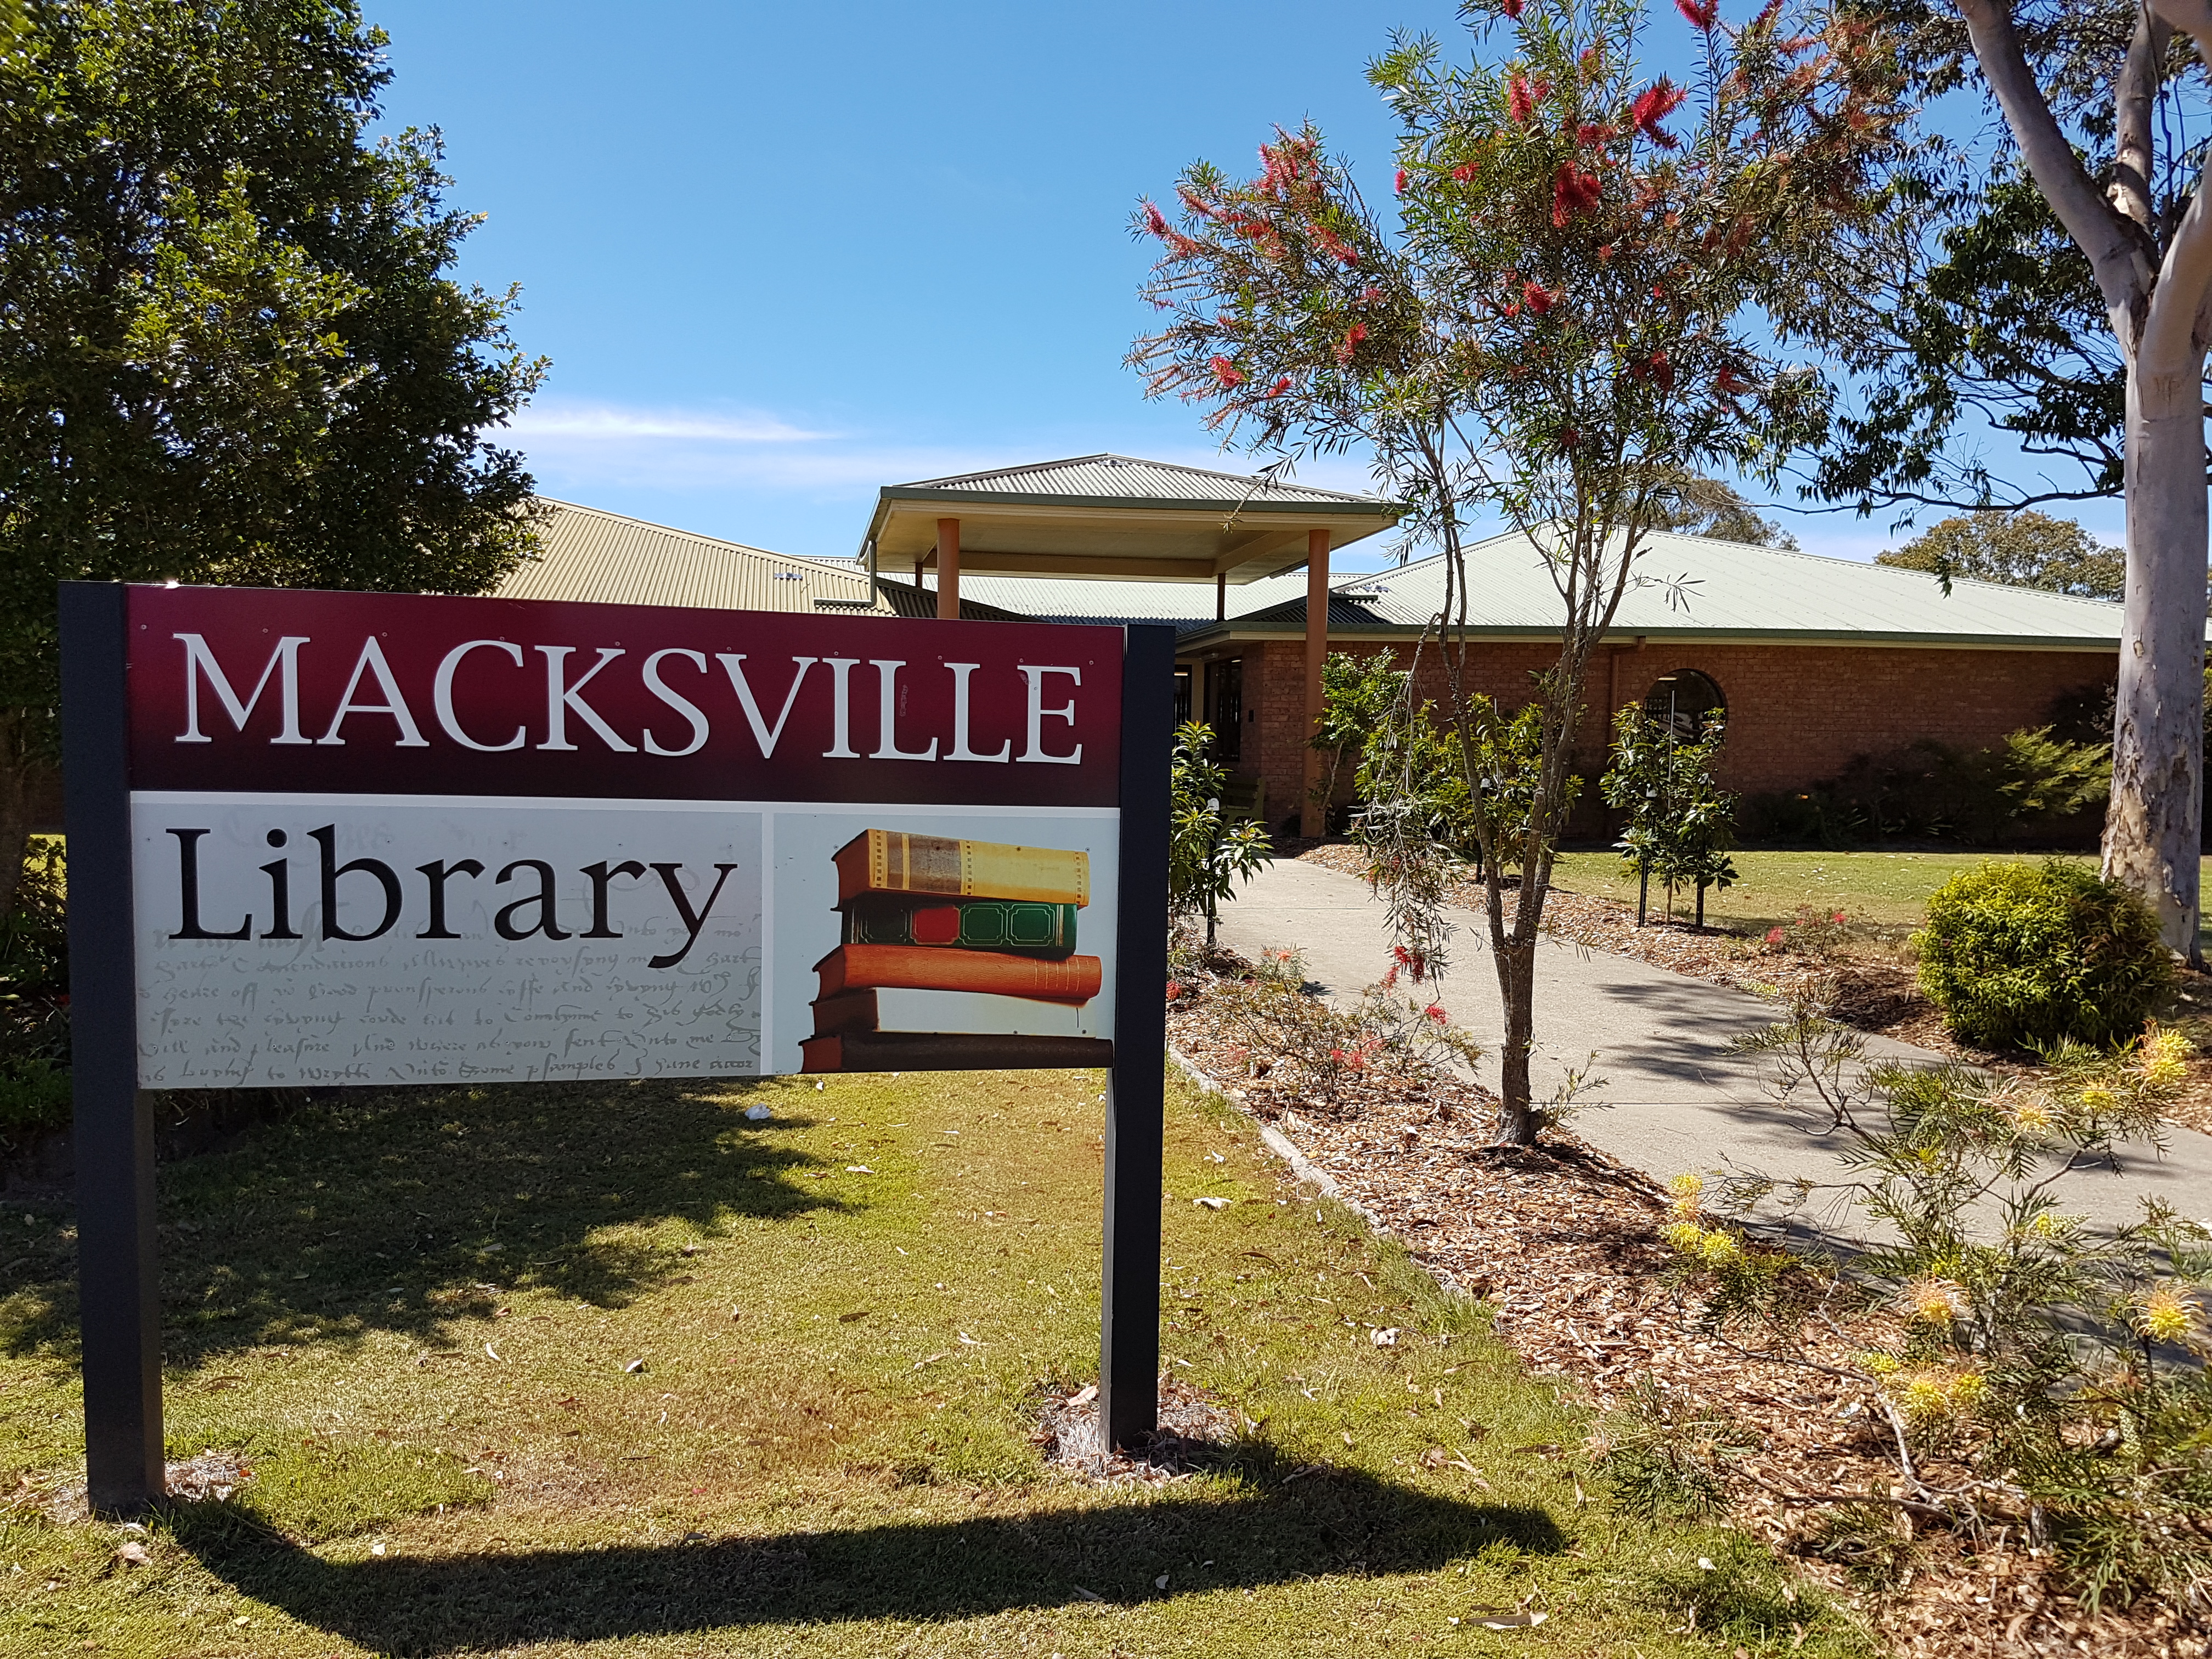 Showing the outside of Macksville Library